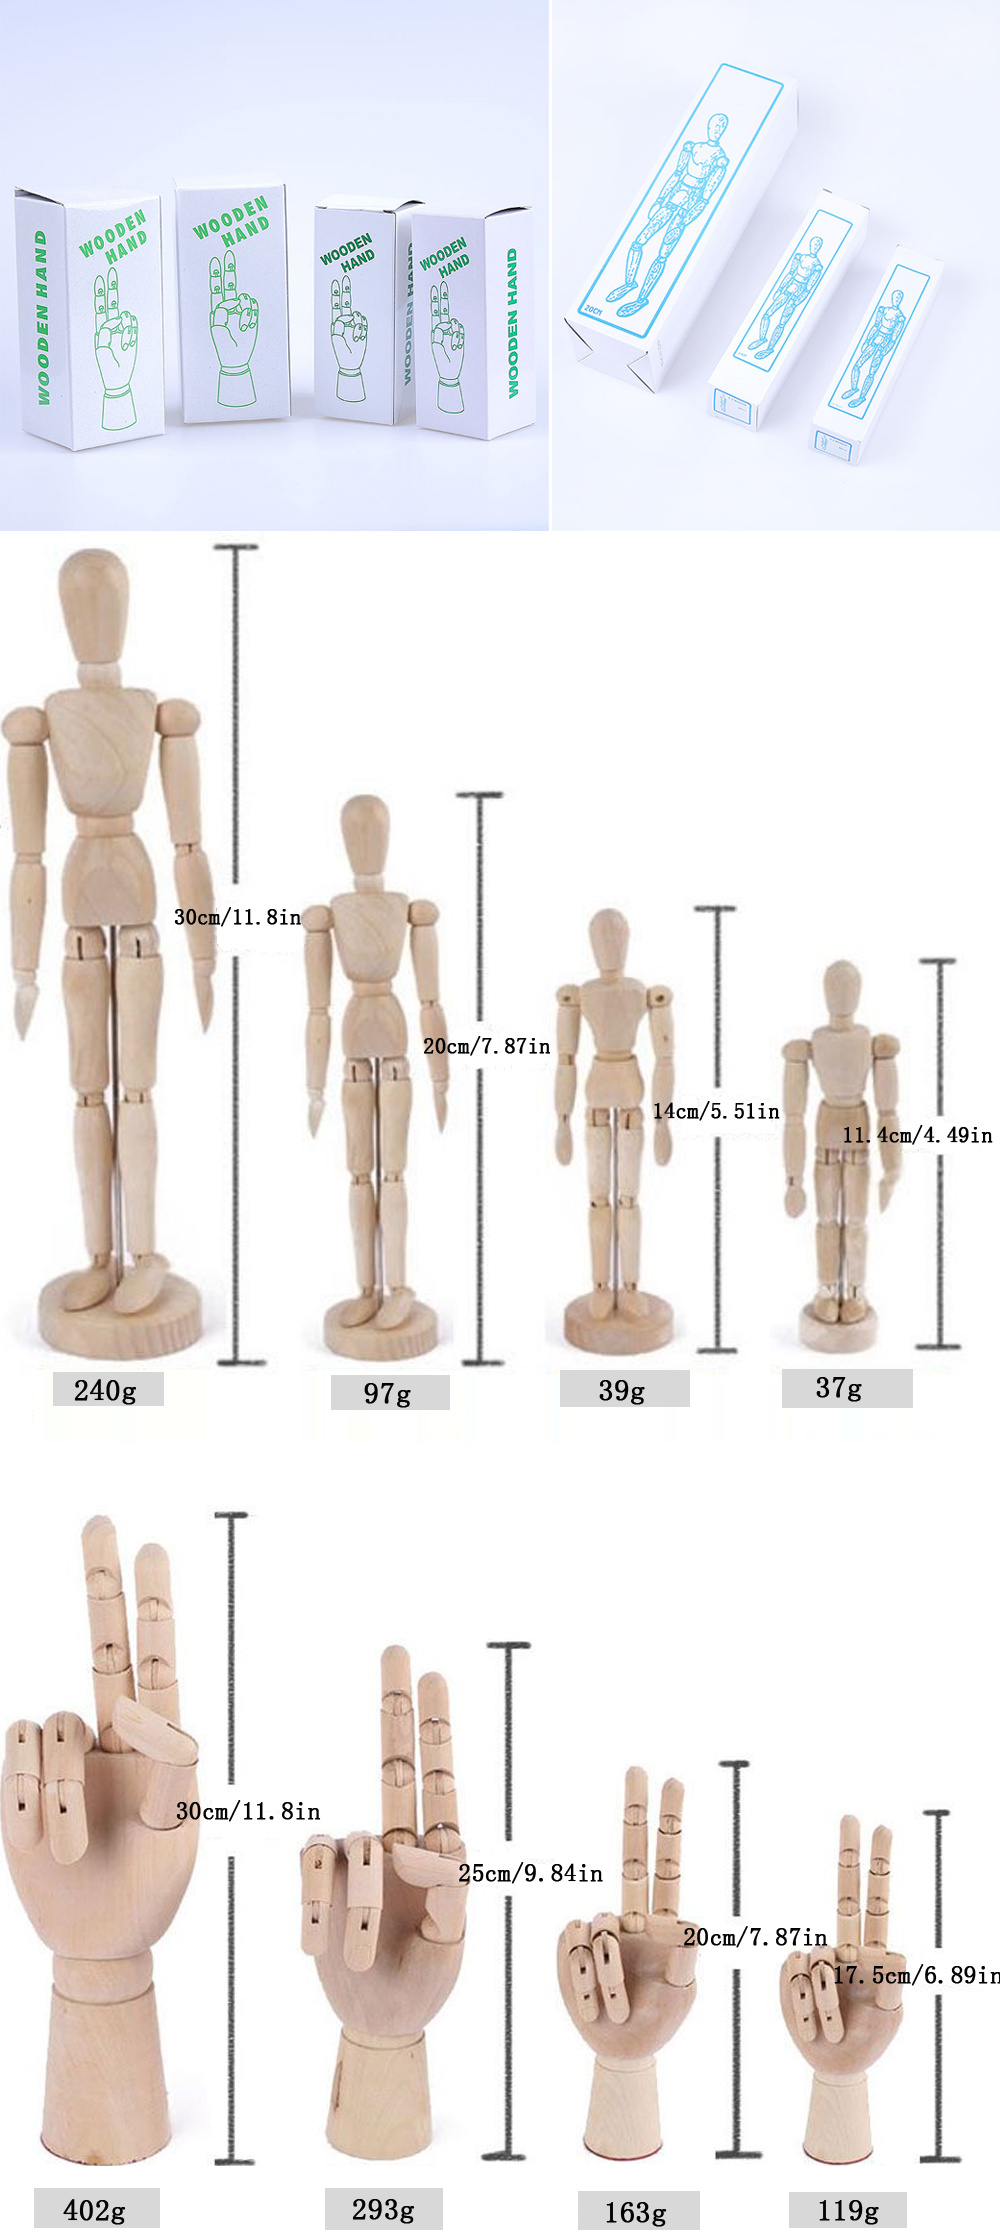  12 Inch Wooden Hand Model Flexible Moveable Fingers Manikin Hand  Figure Left/Right Hand Model for Drawing, Sketching, Painting